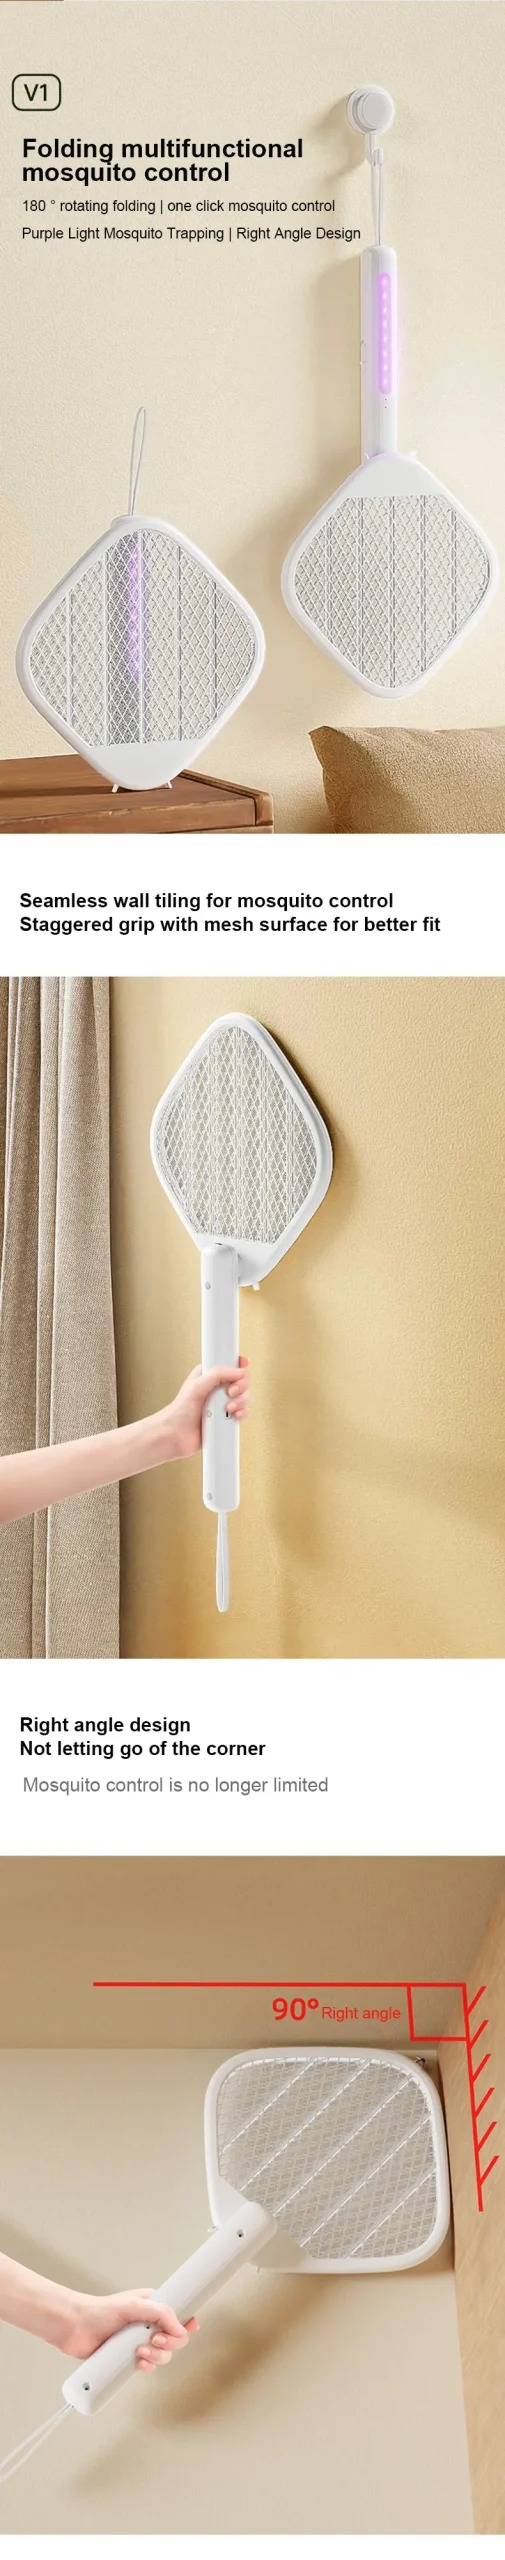 Qualitell Foldable Mosquito Swatter V1 Electric Mosquito Bat